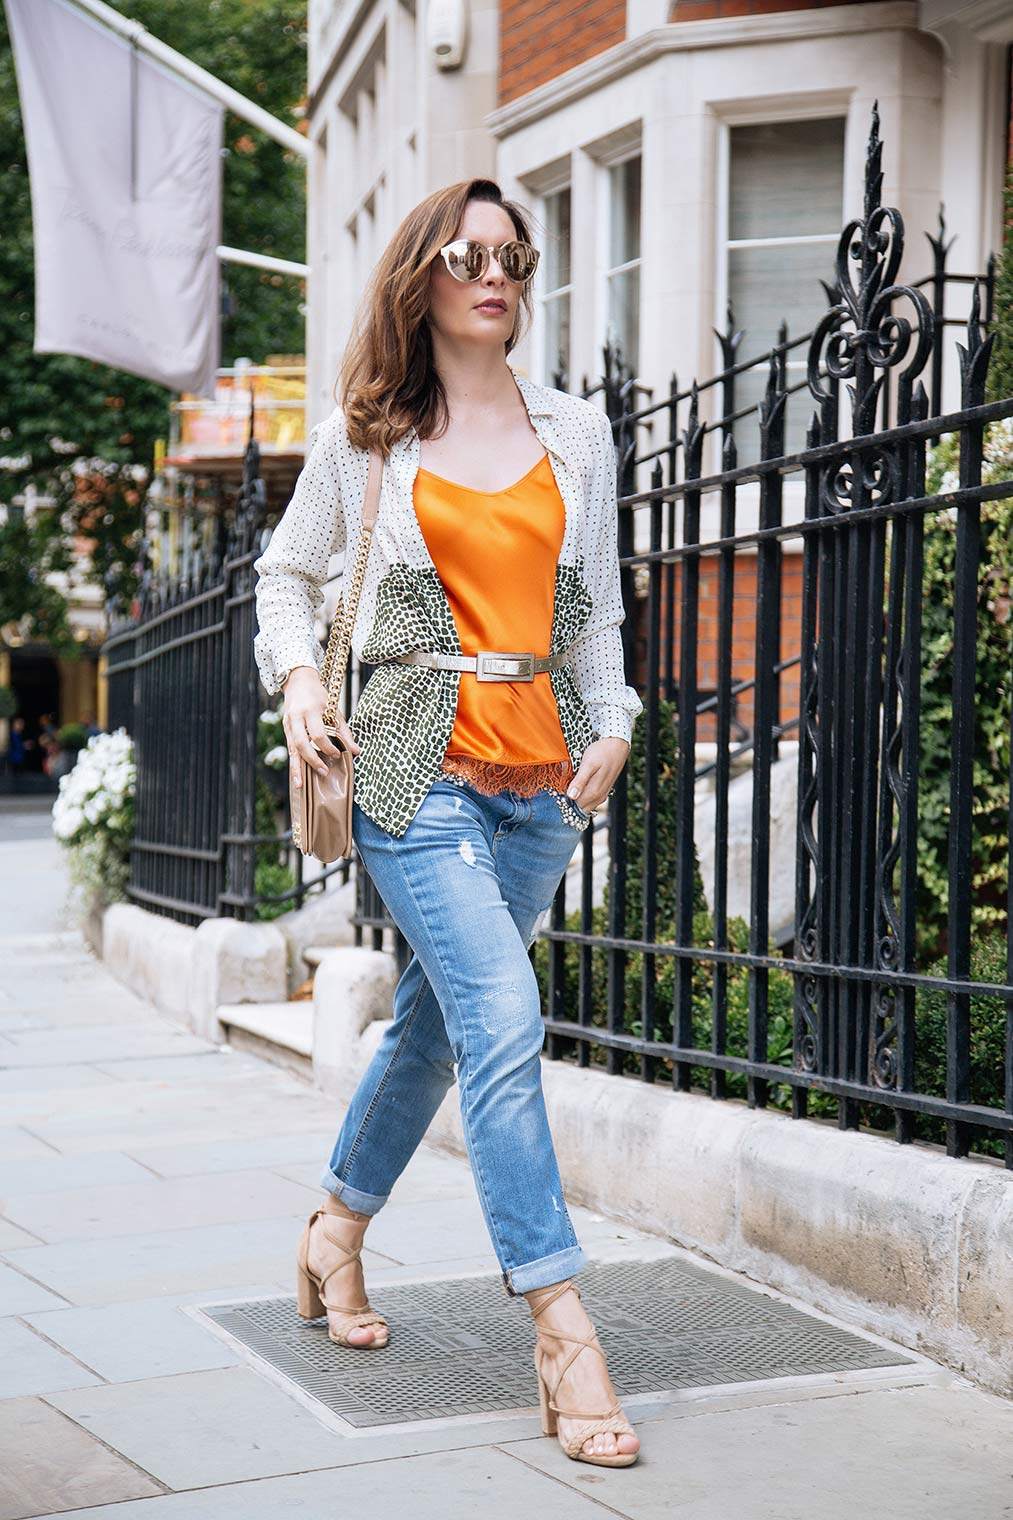 How to create chic outfit with boyfriend jeans